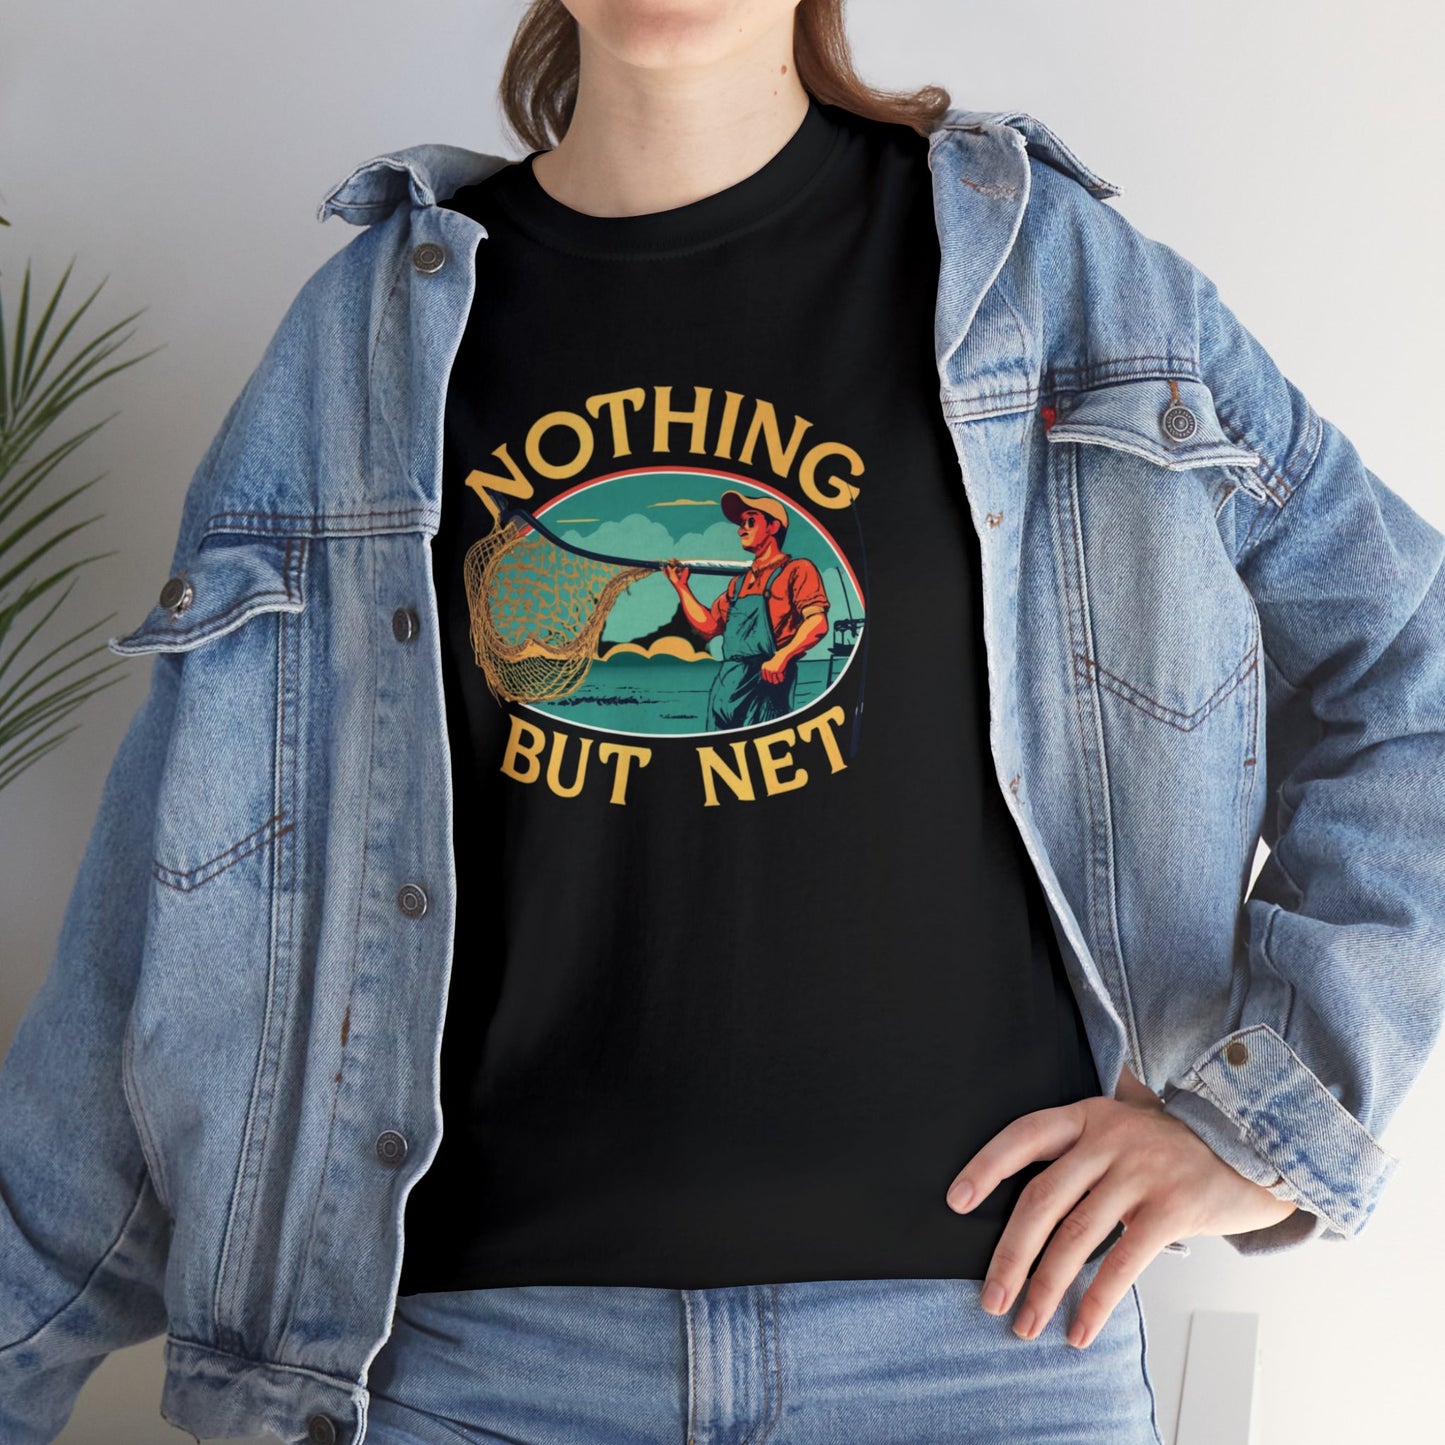 Nothing But Net Unisex Heavy Cotton Tee